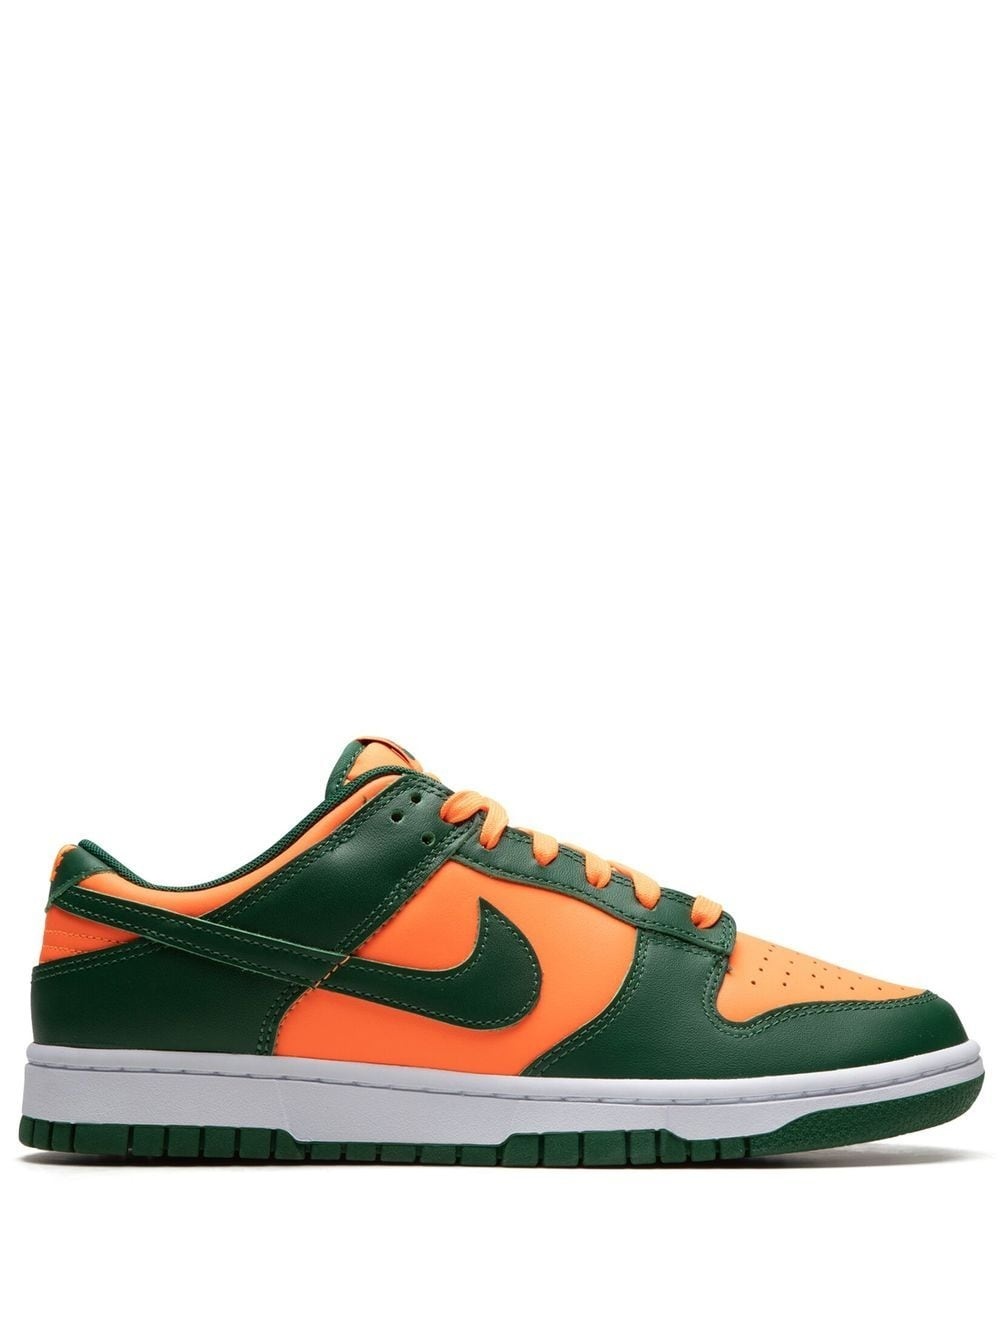 Dunk Low "Miami Hurricanes" sneakers - 1